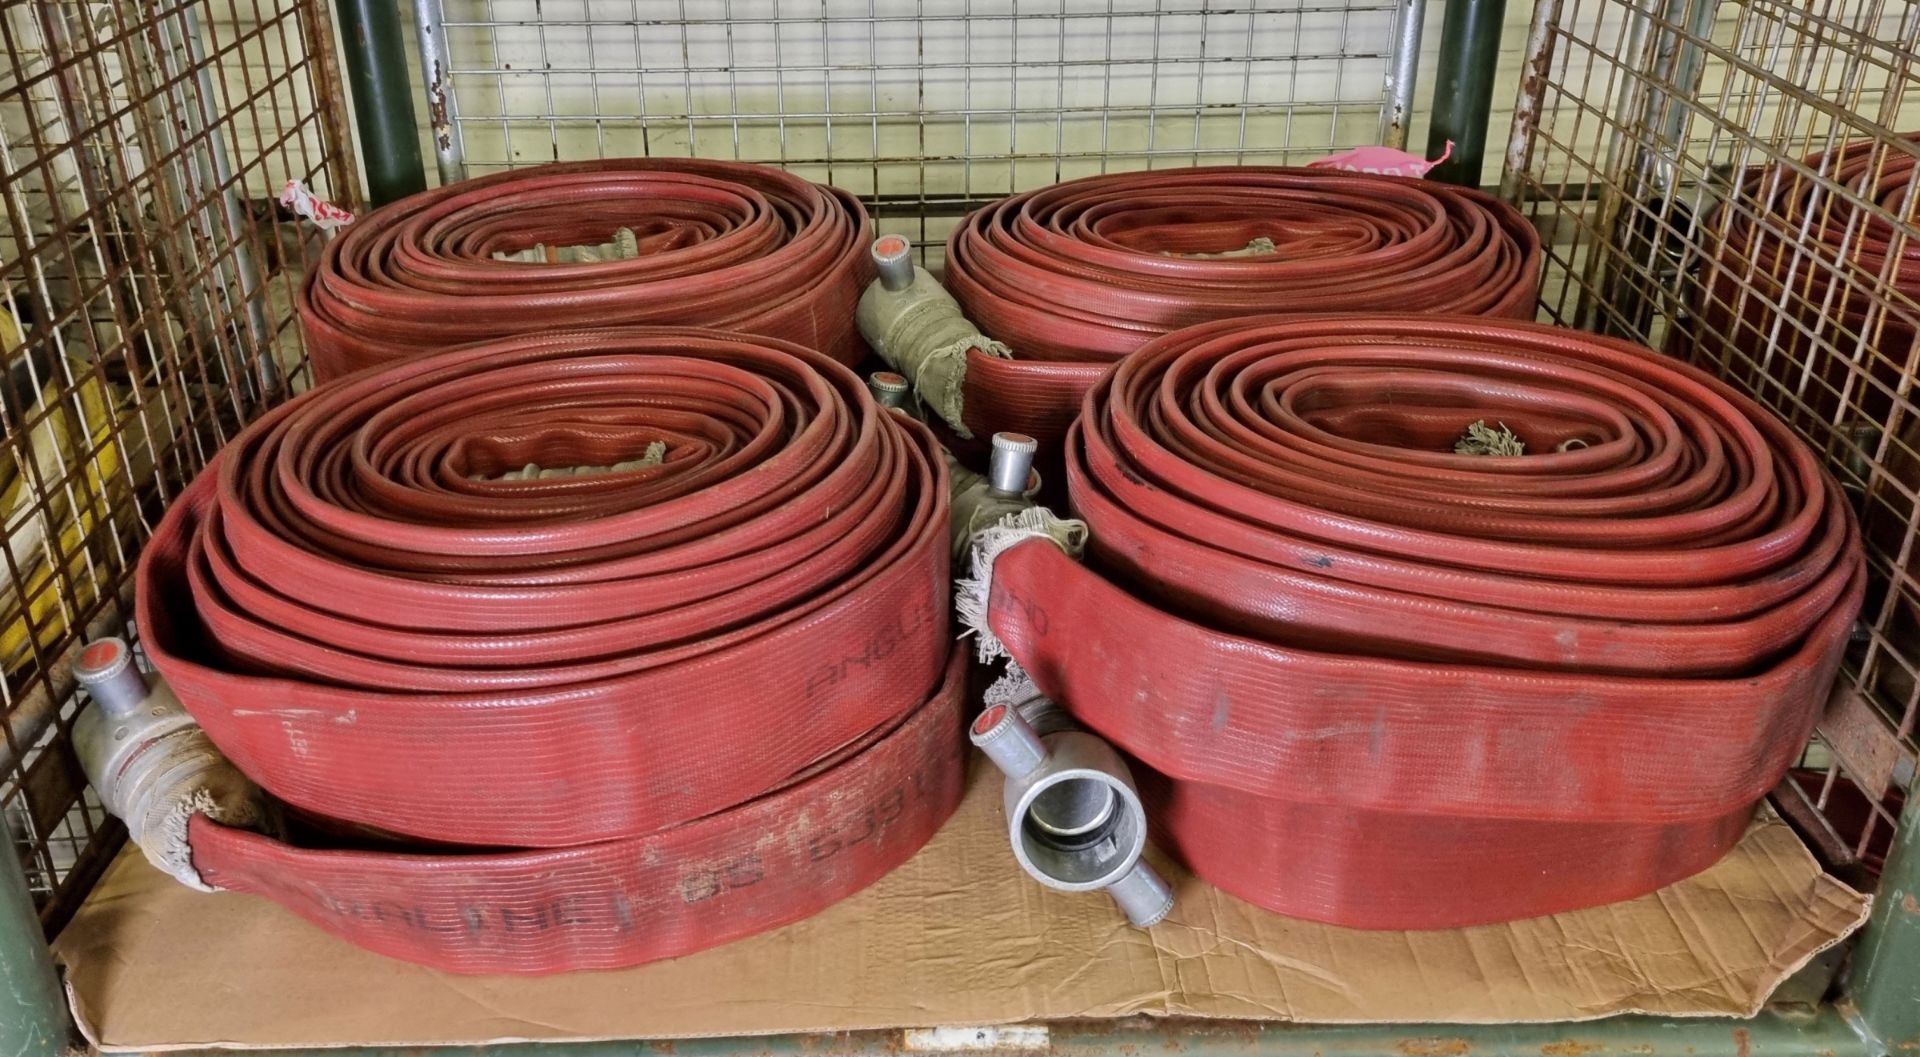 8x Angus Duraline 70mm lay flat hoses with couplings - approx 23 M in length - Image 2 of 5